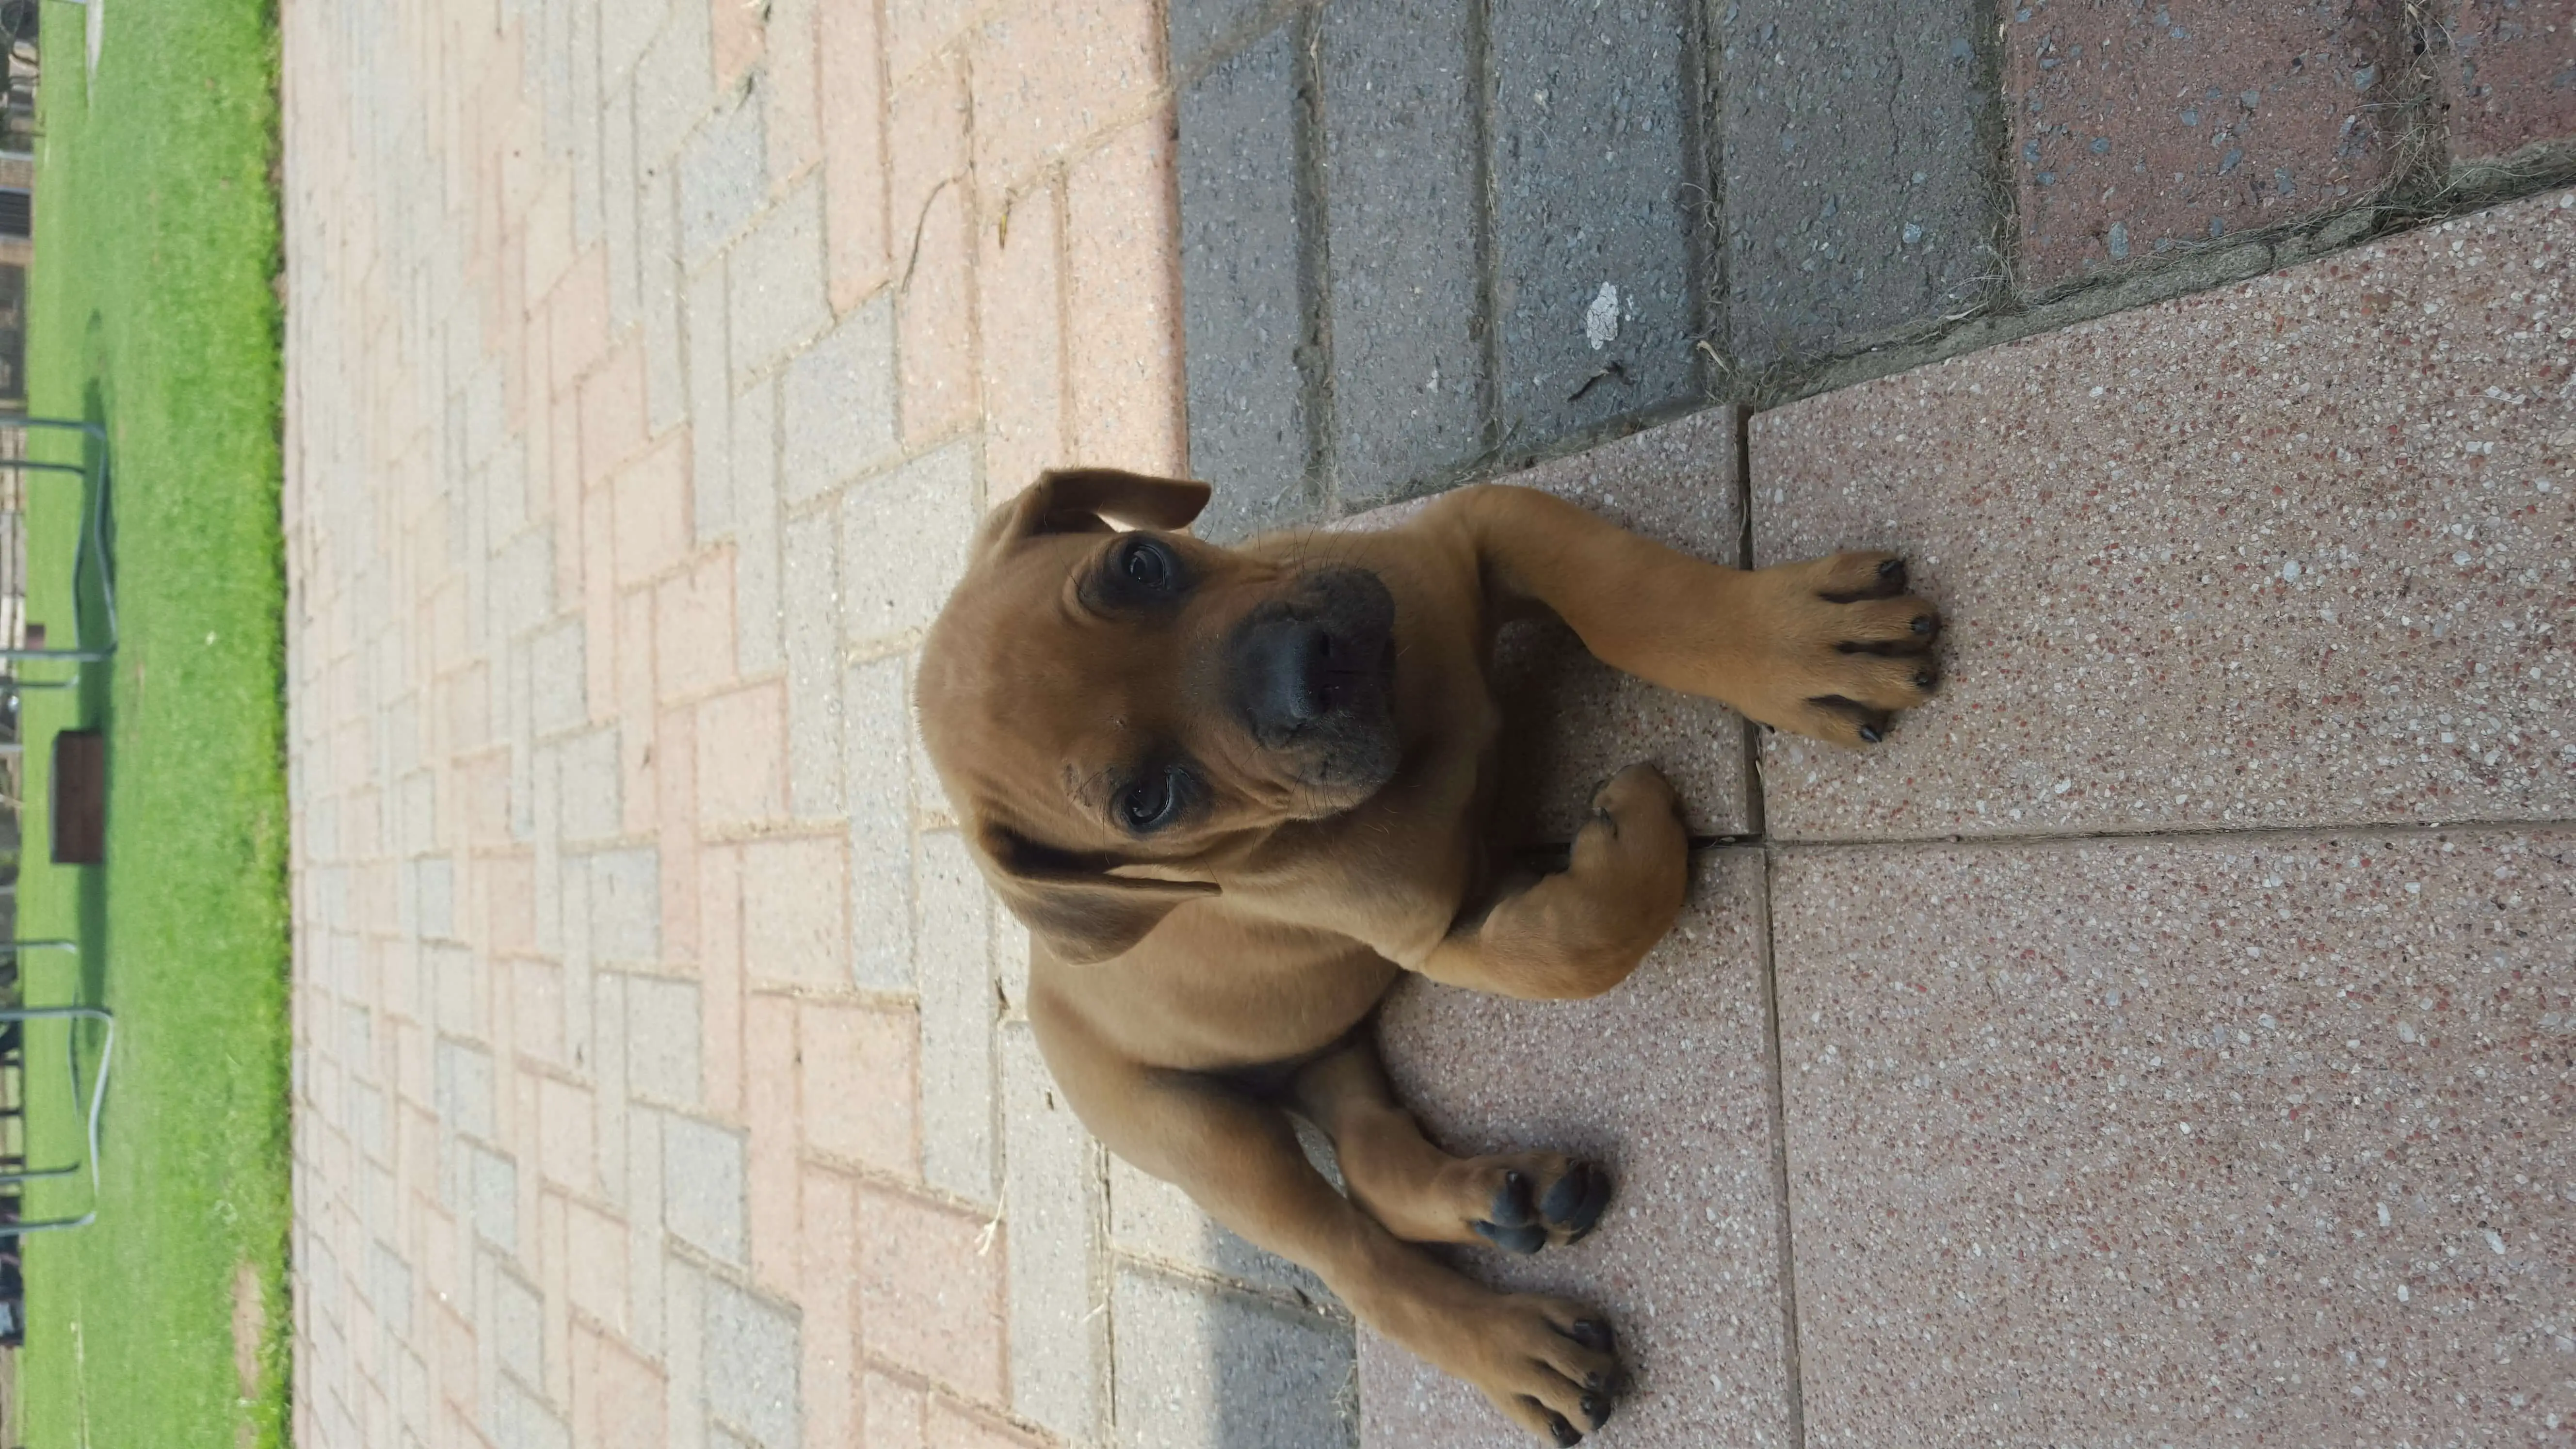 Boerboel Puppies for Sale in Other by Aqua Pool Heater Heater